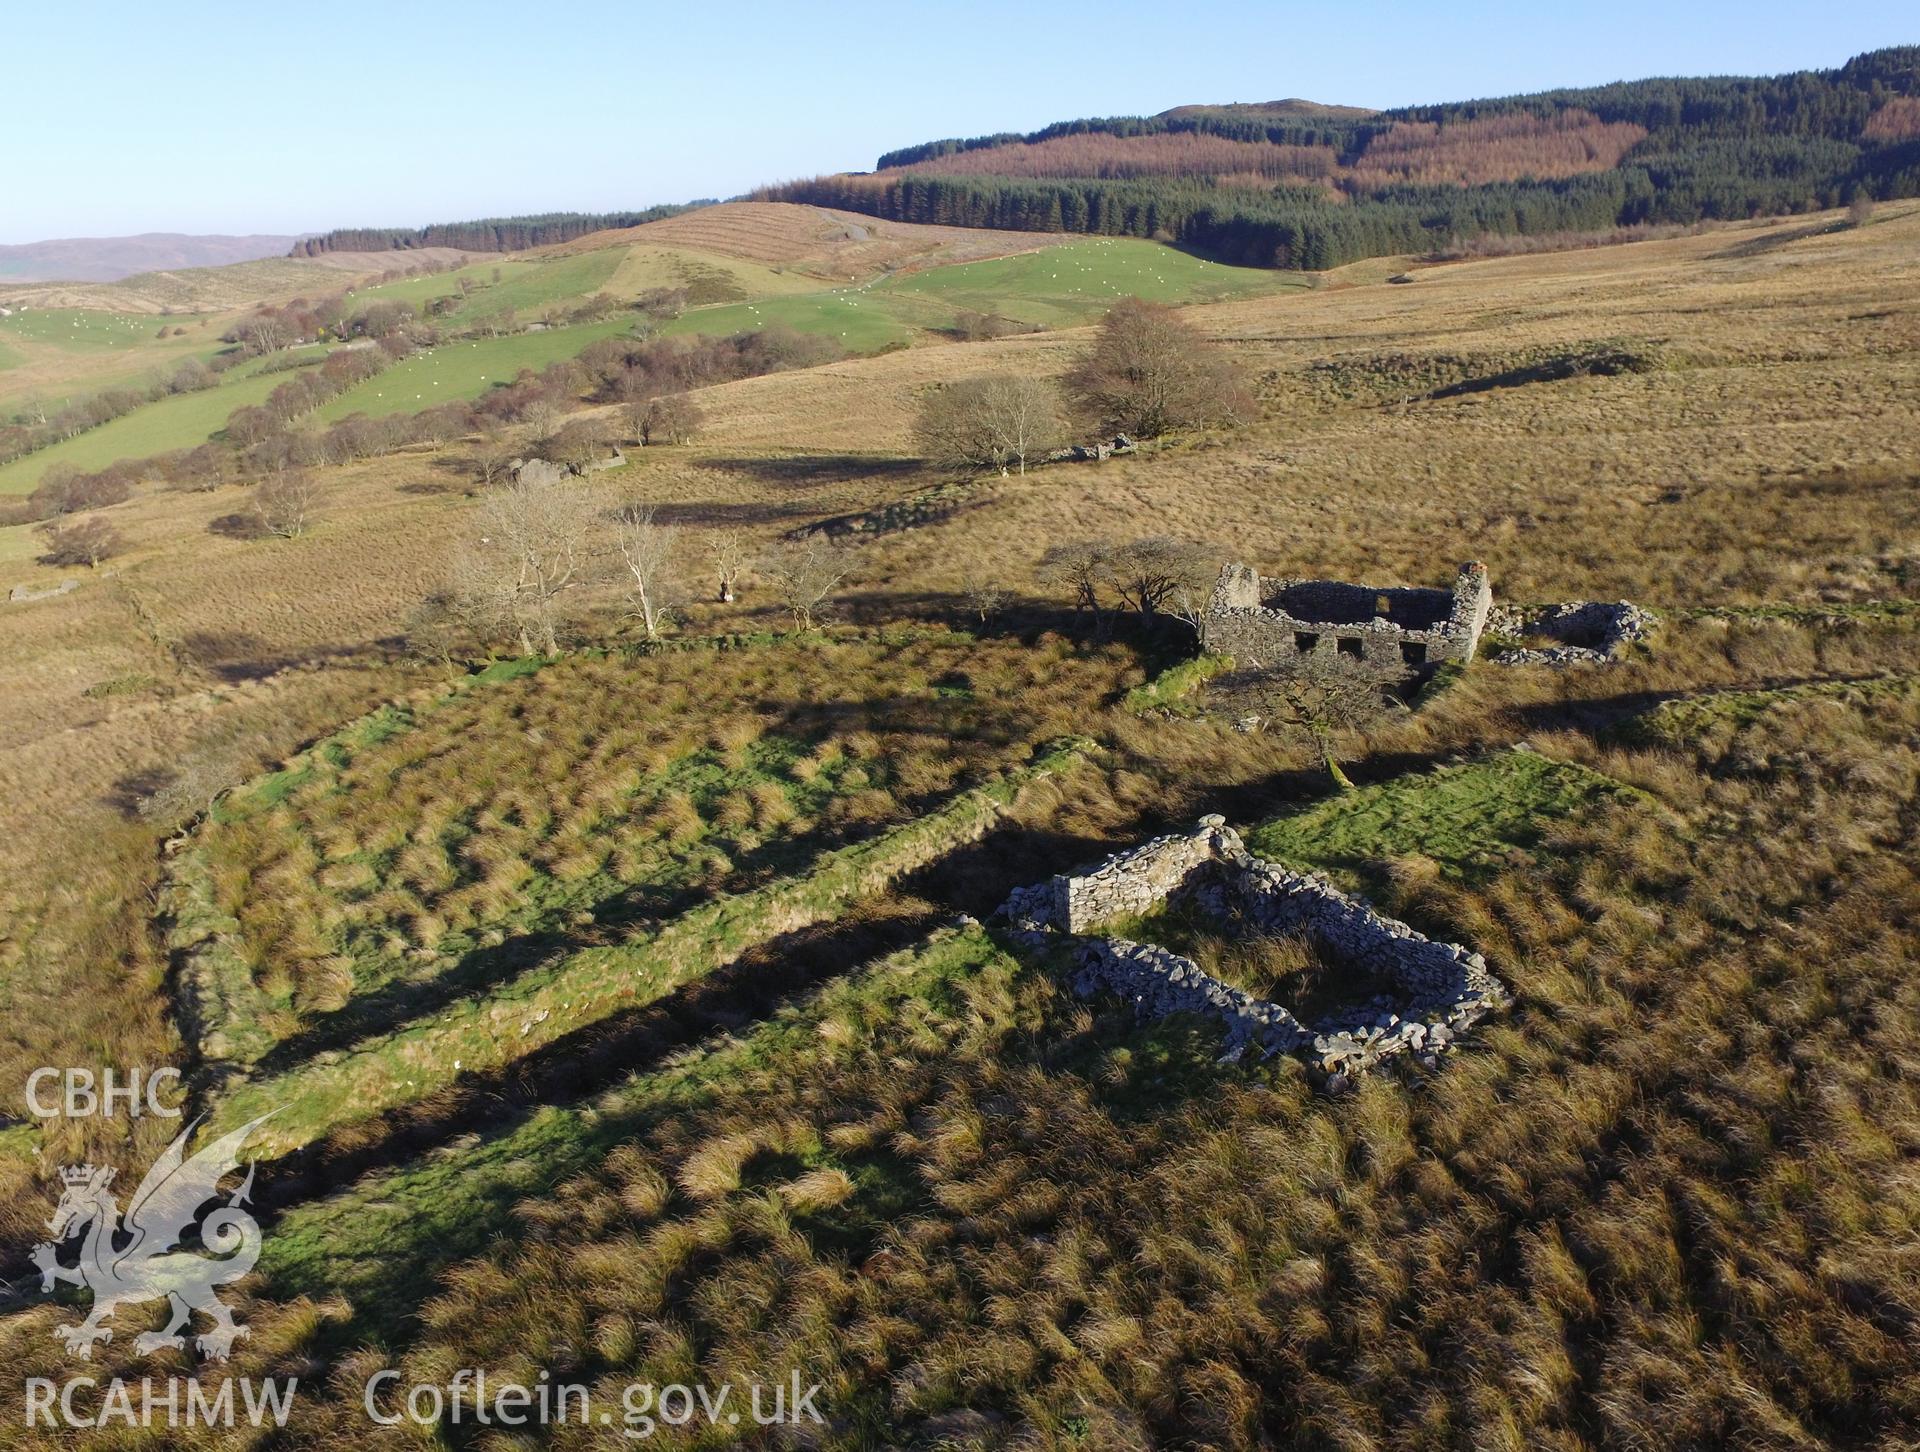 Aerial view showing remains of doorway, window spaces and chimney piece at Tynewydd stone cottage, as well as the ruined outbuilding to its west, south west of Bryneithinog farm, Ystrad Fflur. Colour photograph taken by Paul R. Davis on 18th November 2018.